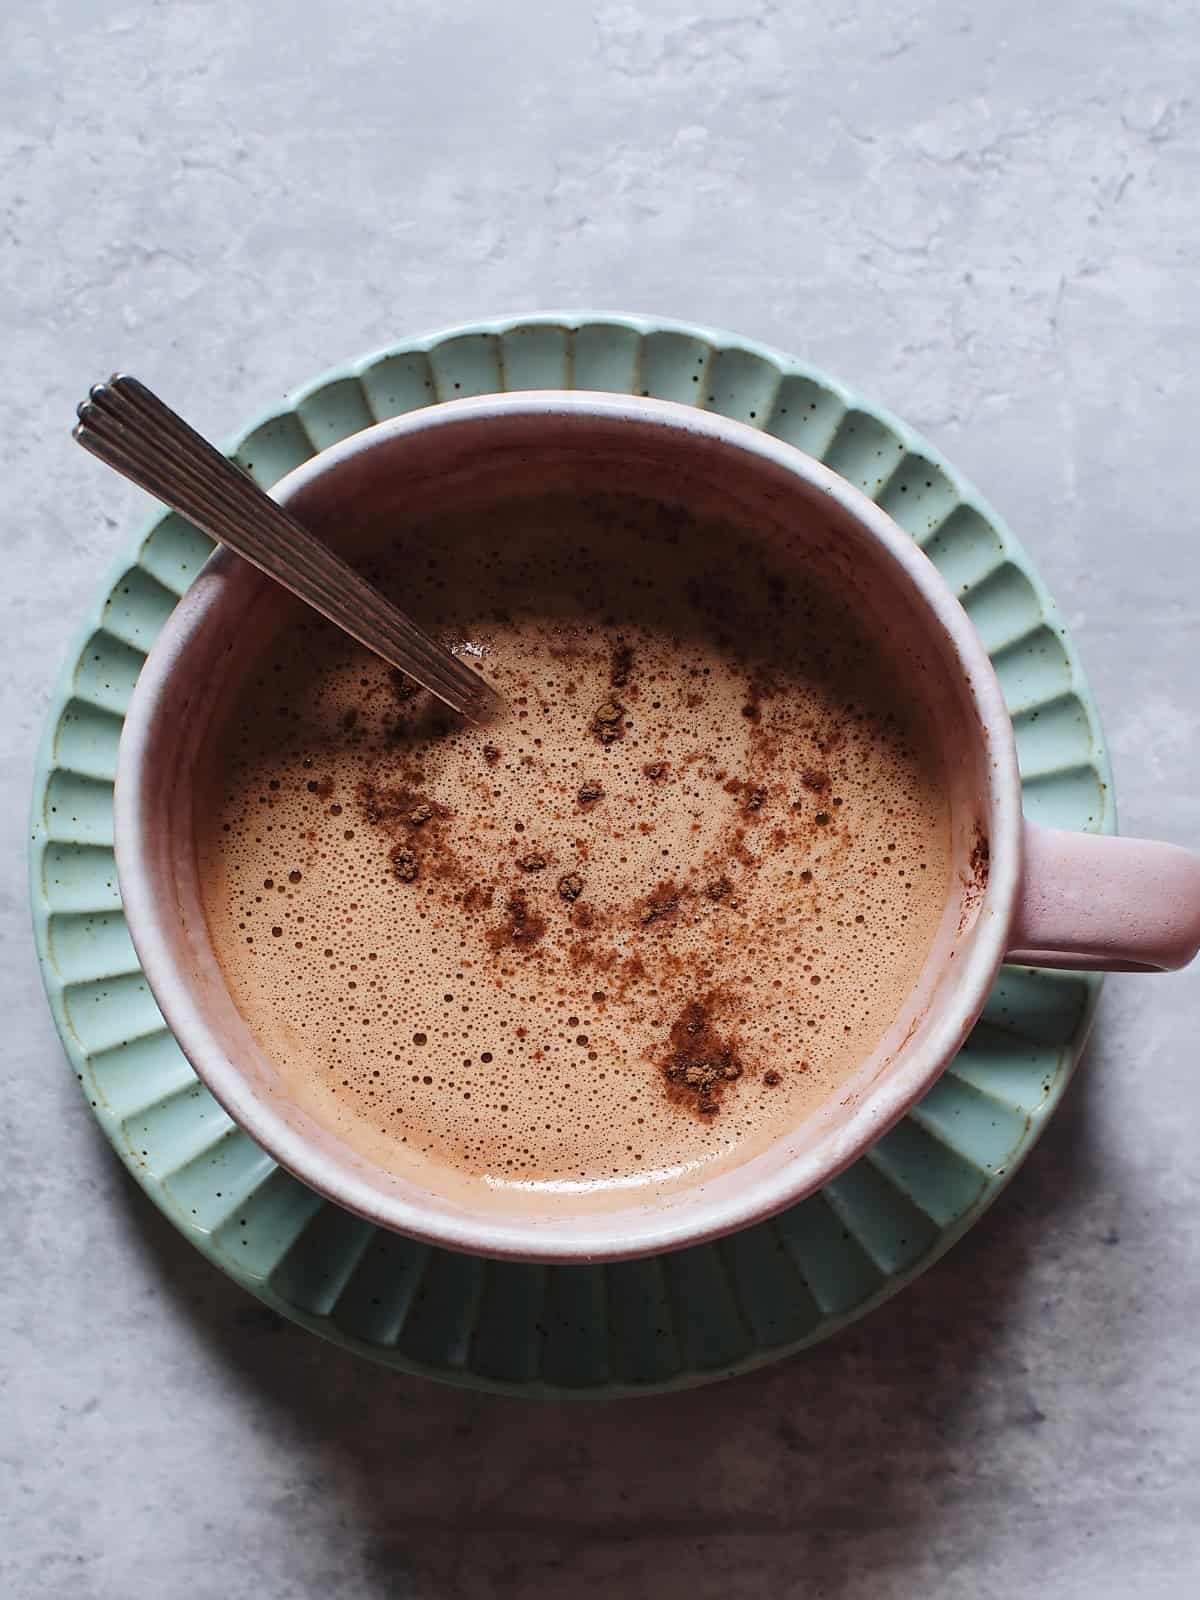 Hot chocolate collagen sprinkled with cinnamon in a cup with a spoon.